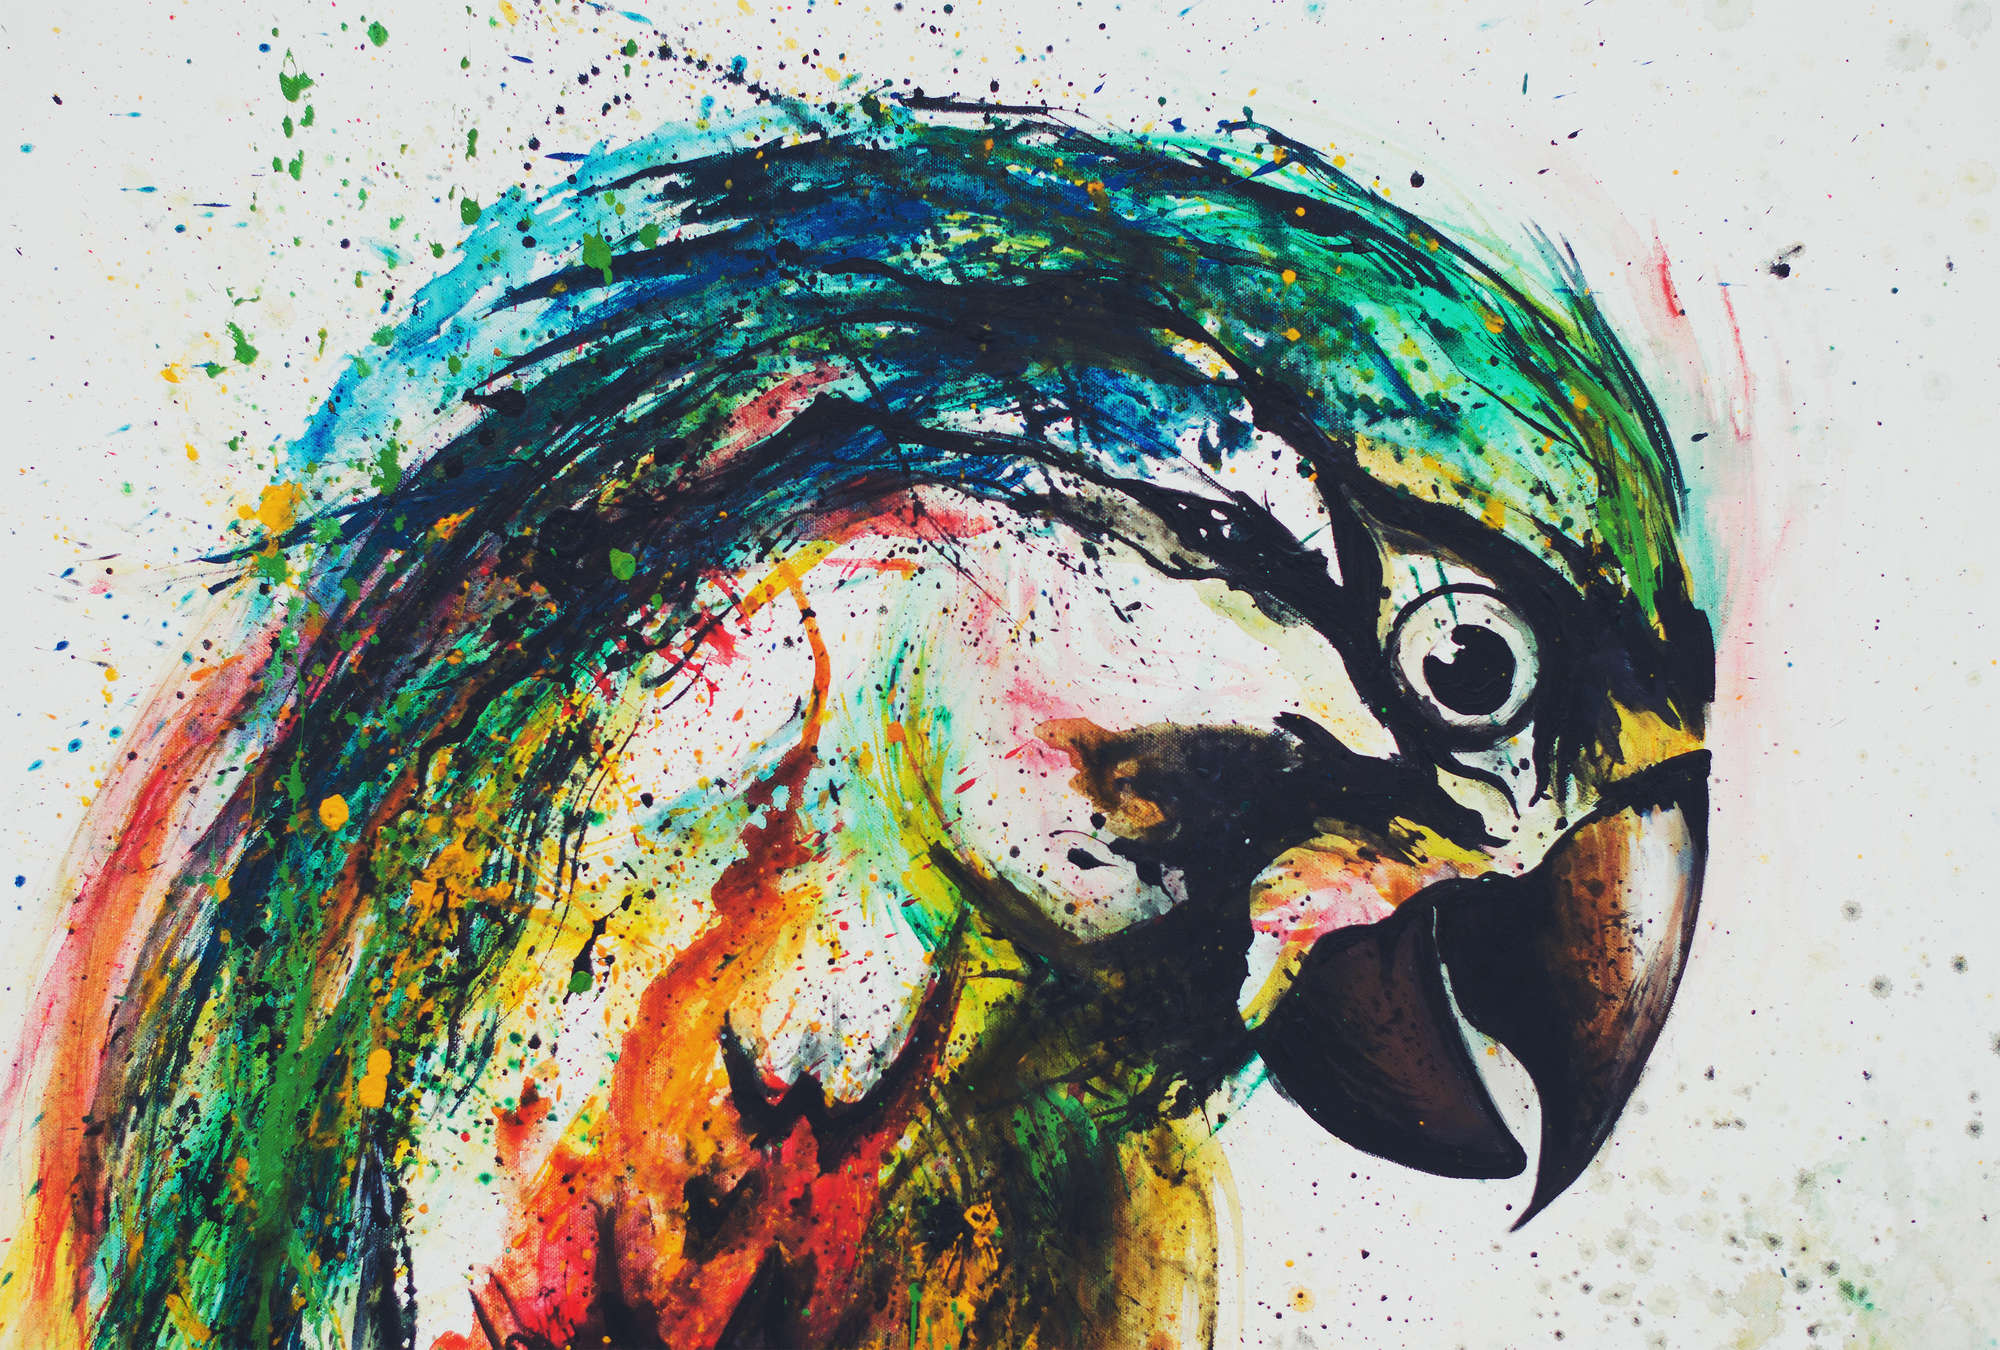             Photo wallpaper parrot in colourful drawing style
        